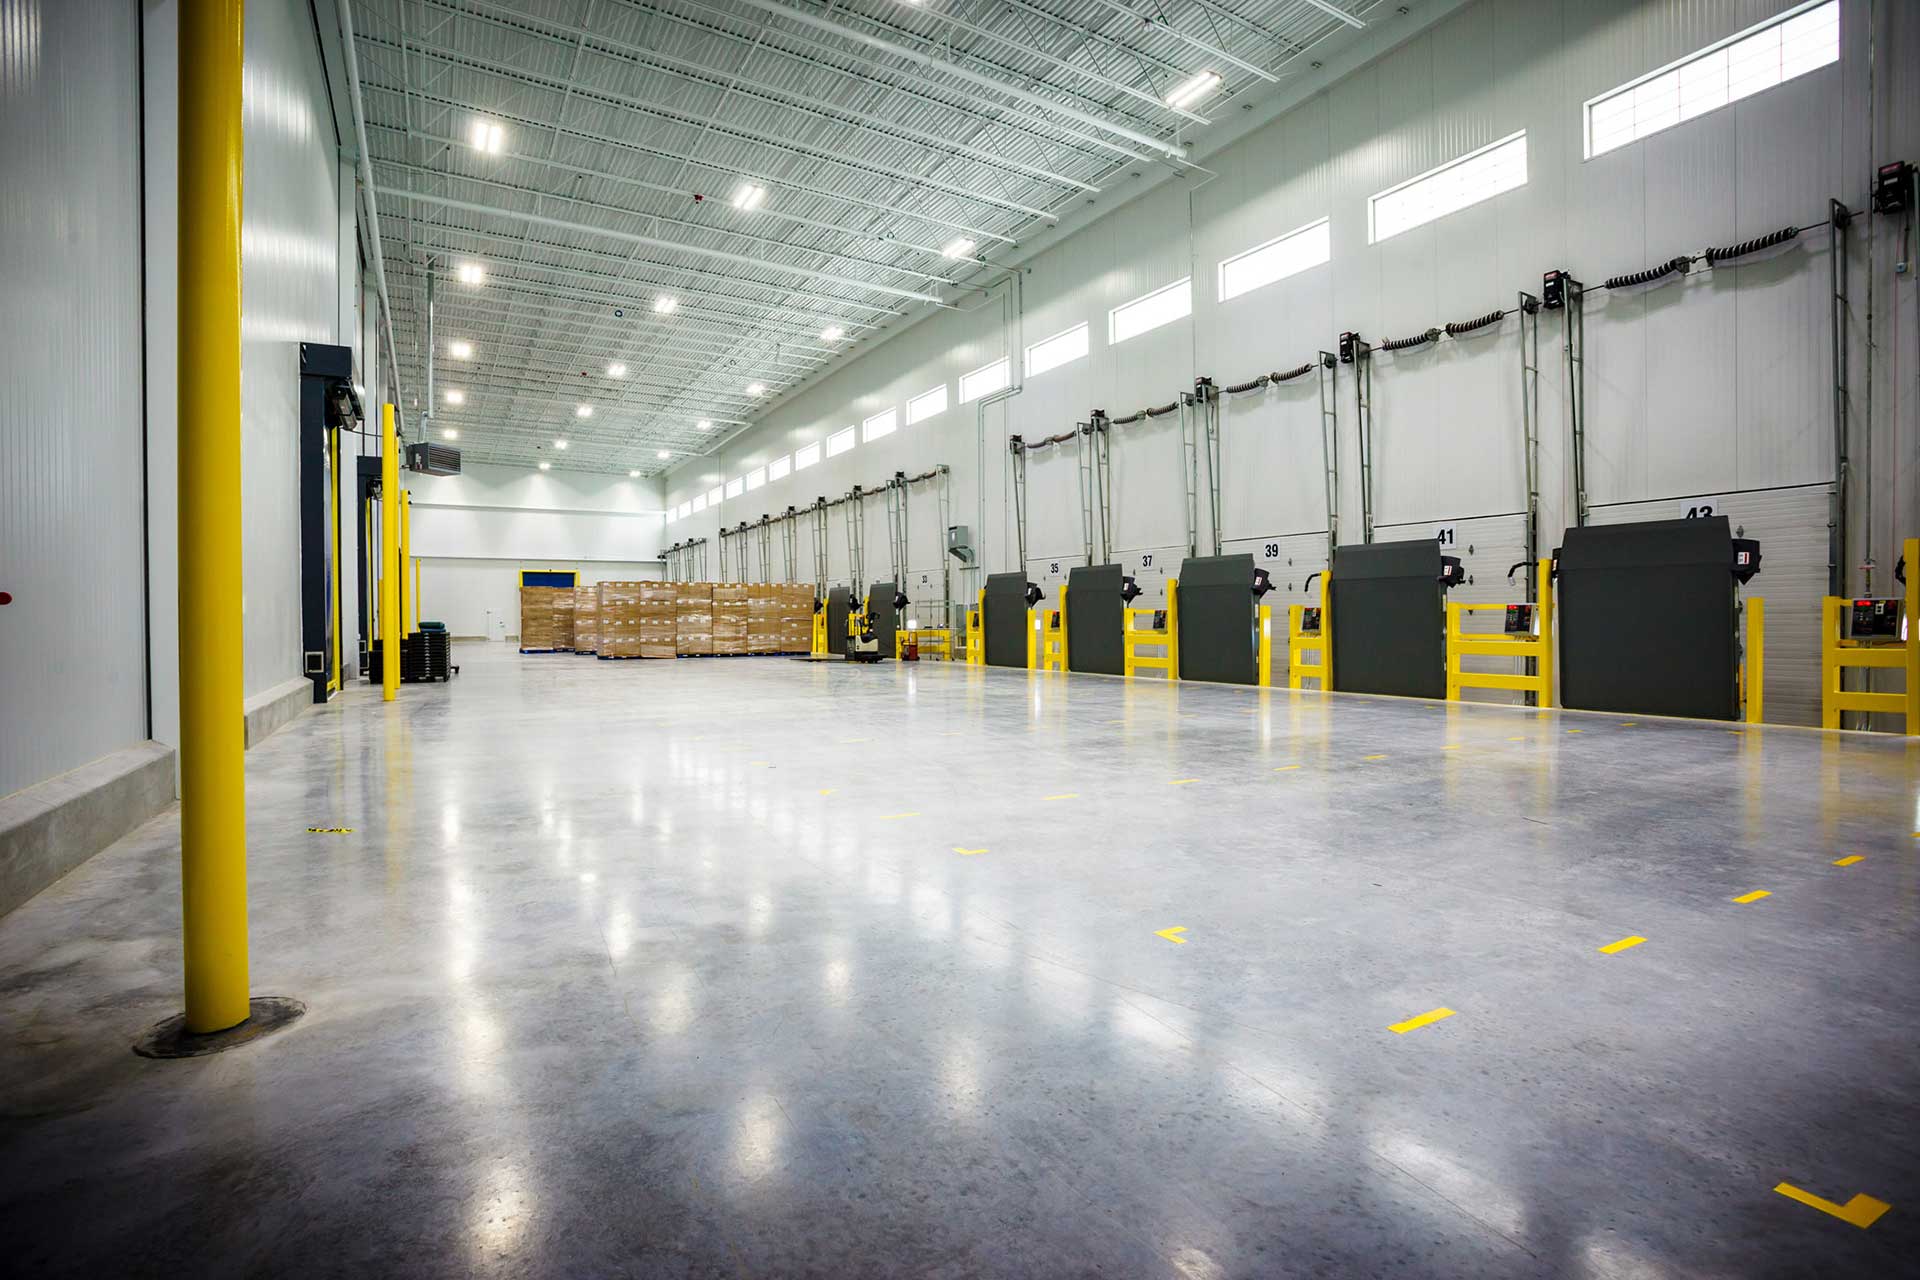 Interior view of truck docks at Golden State Foods distribution facility